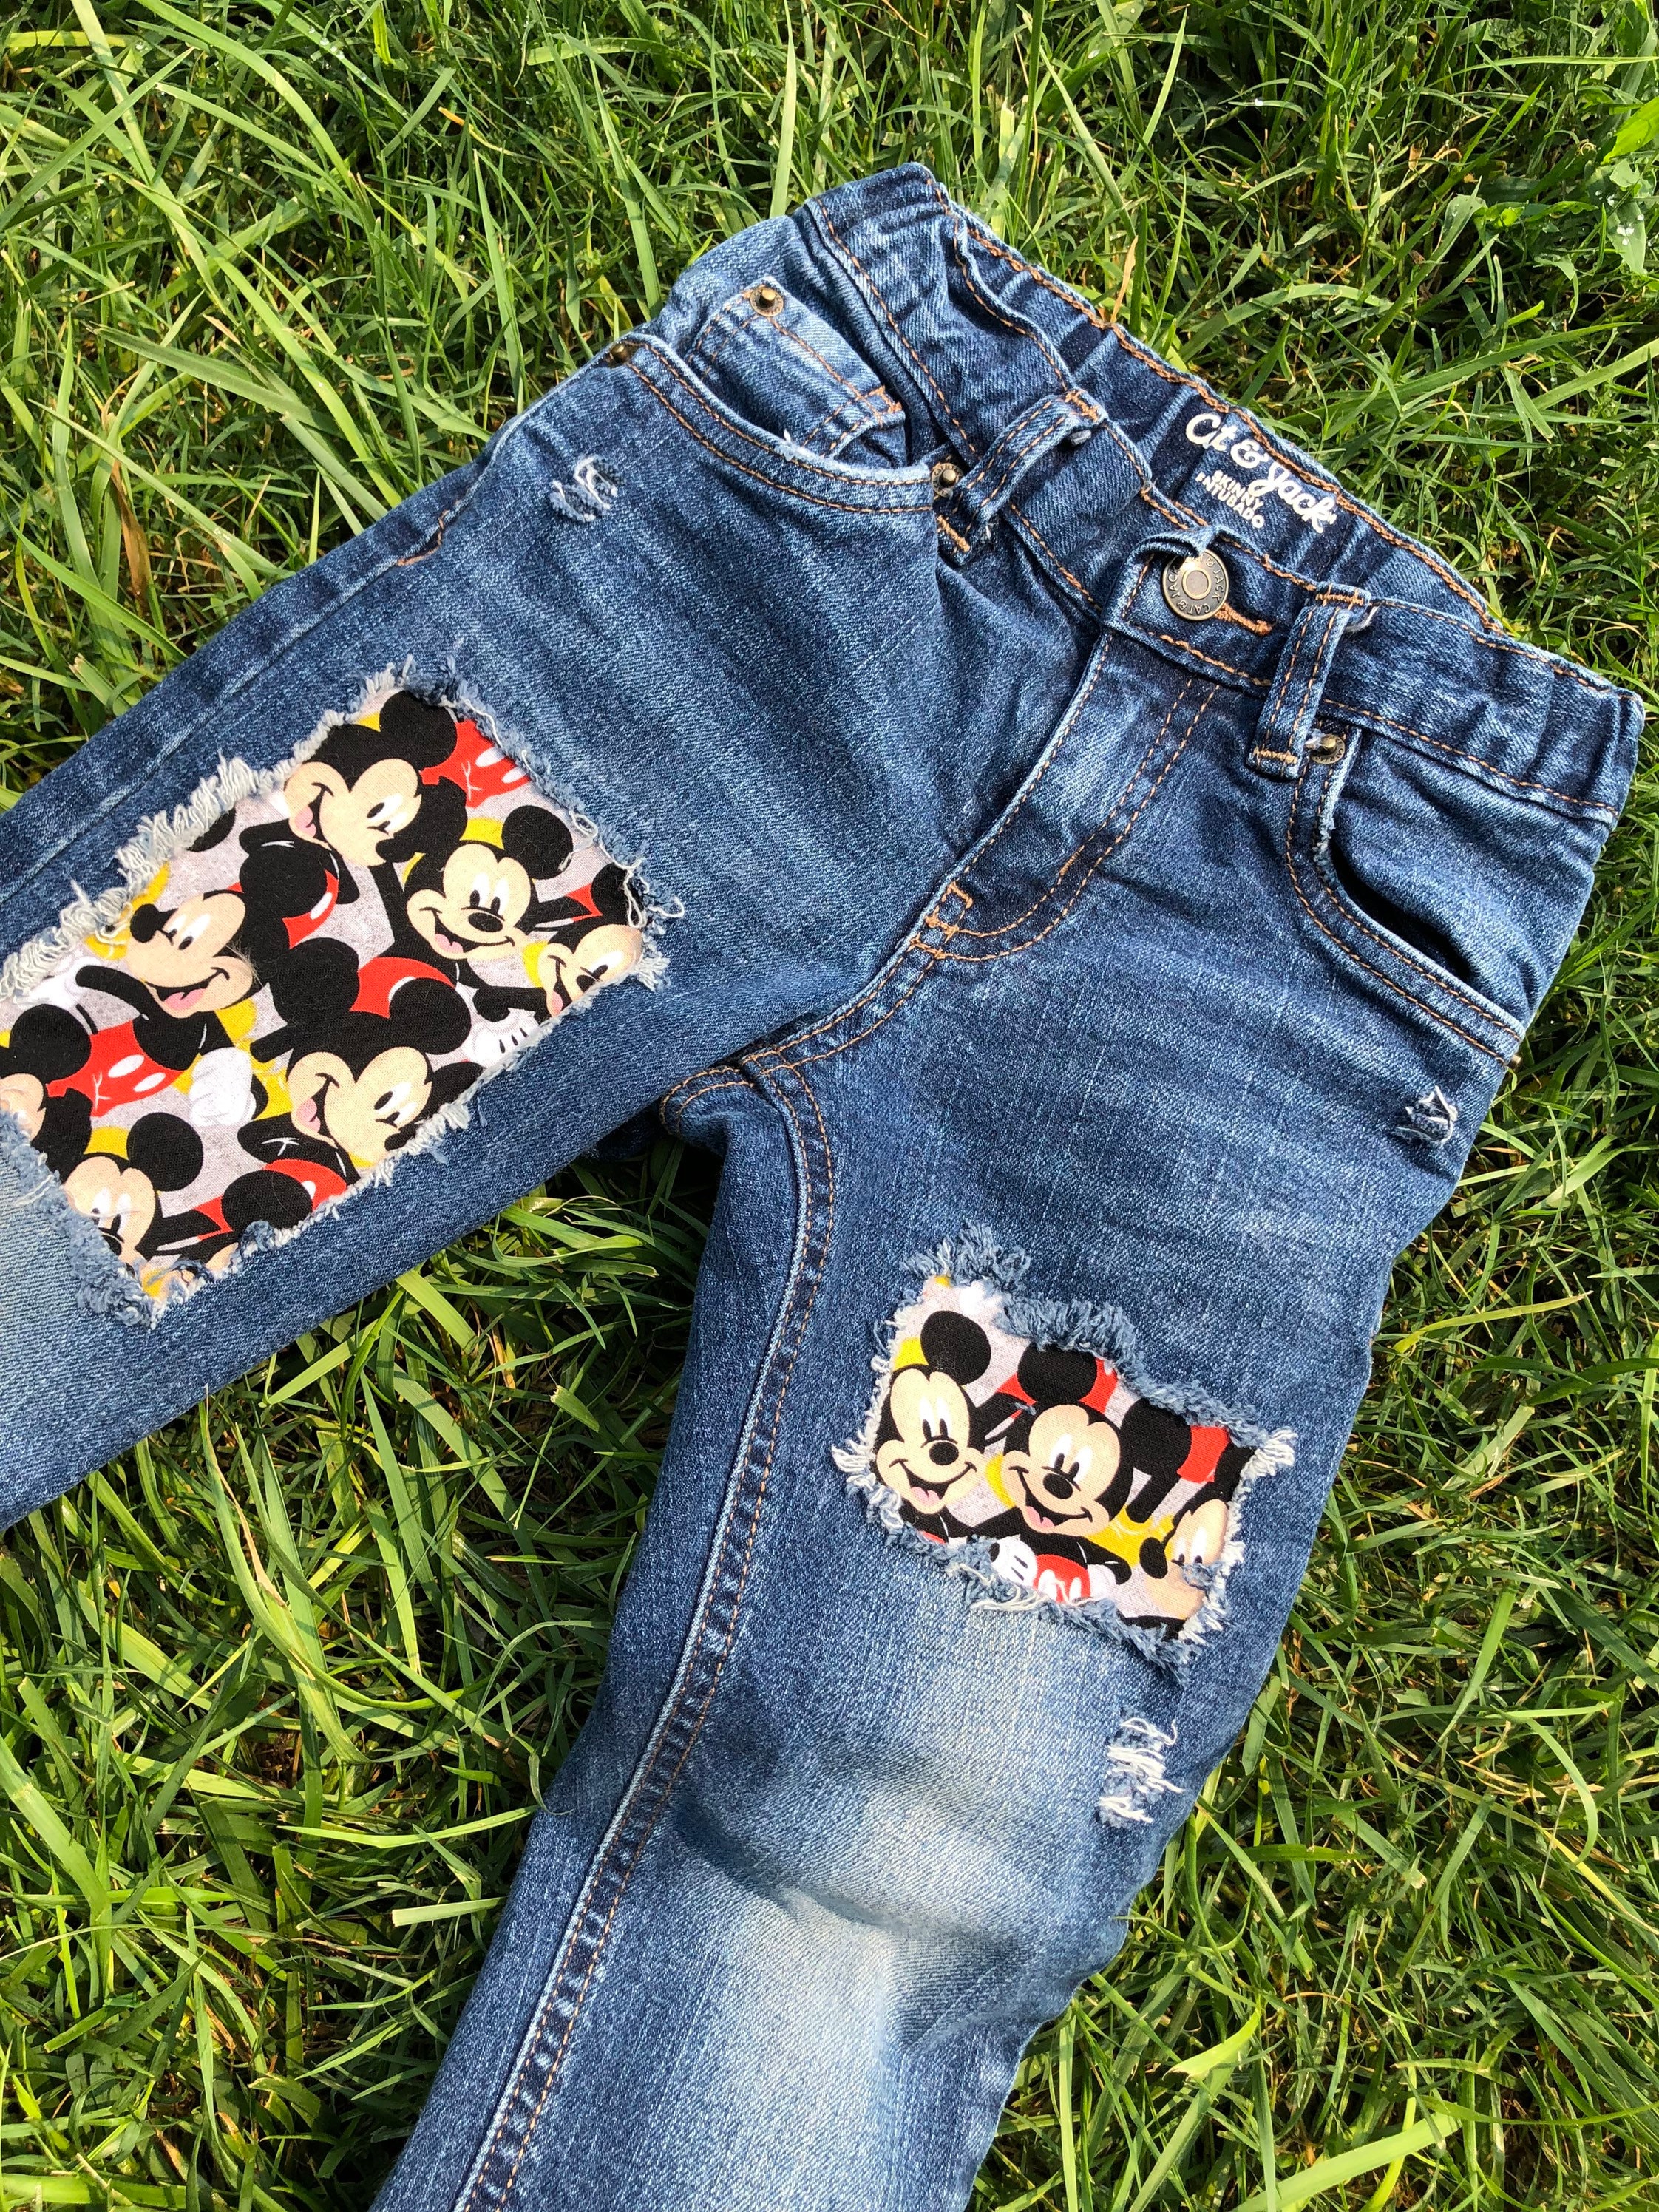 Mickey Mouse Jeans Distressed Disneyland Jeans Boys Birthday - Etsy